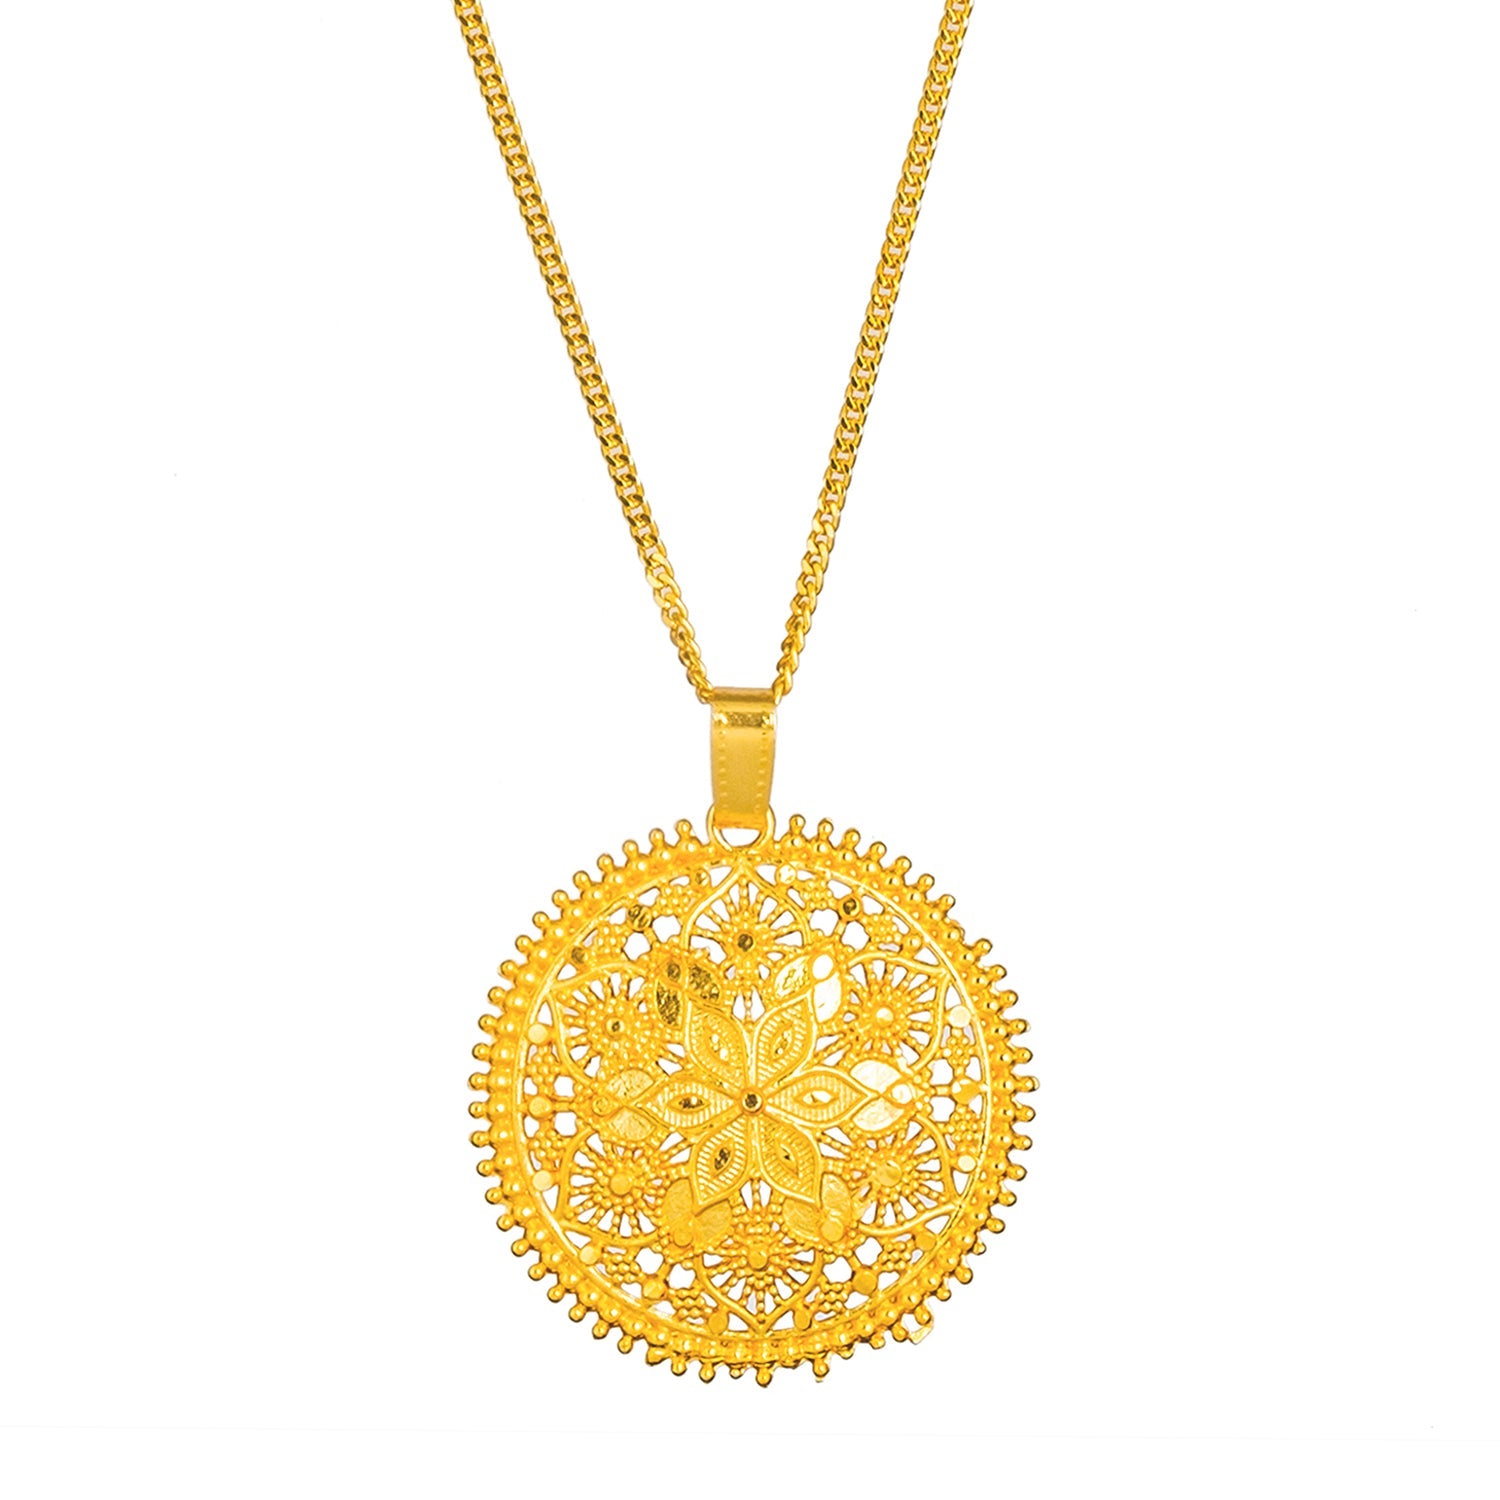 Pendant Necklaces - Fine Jewelry for Every Style